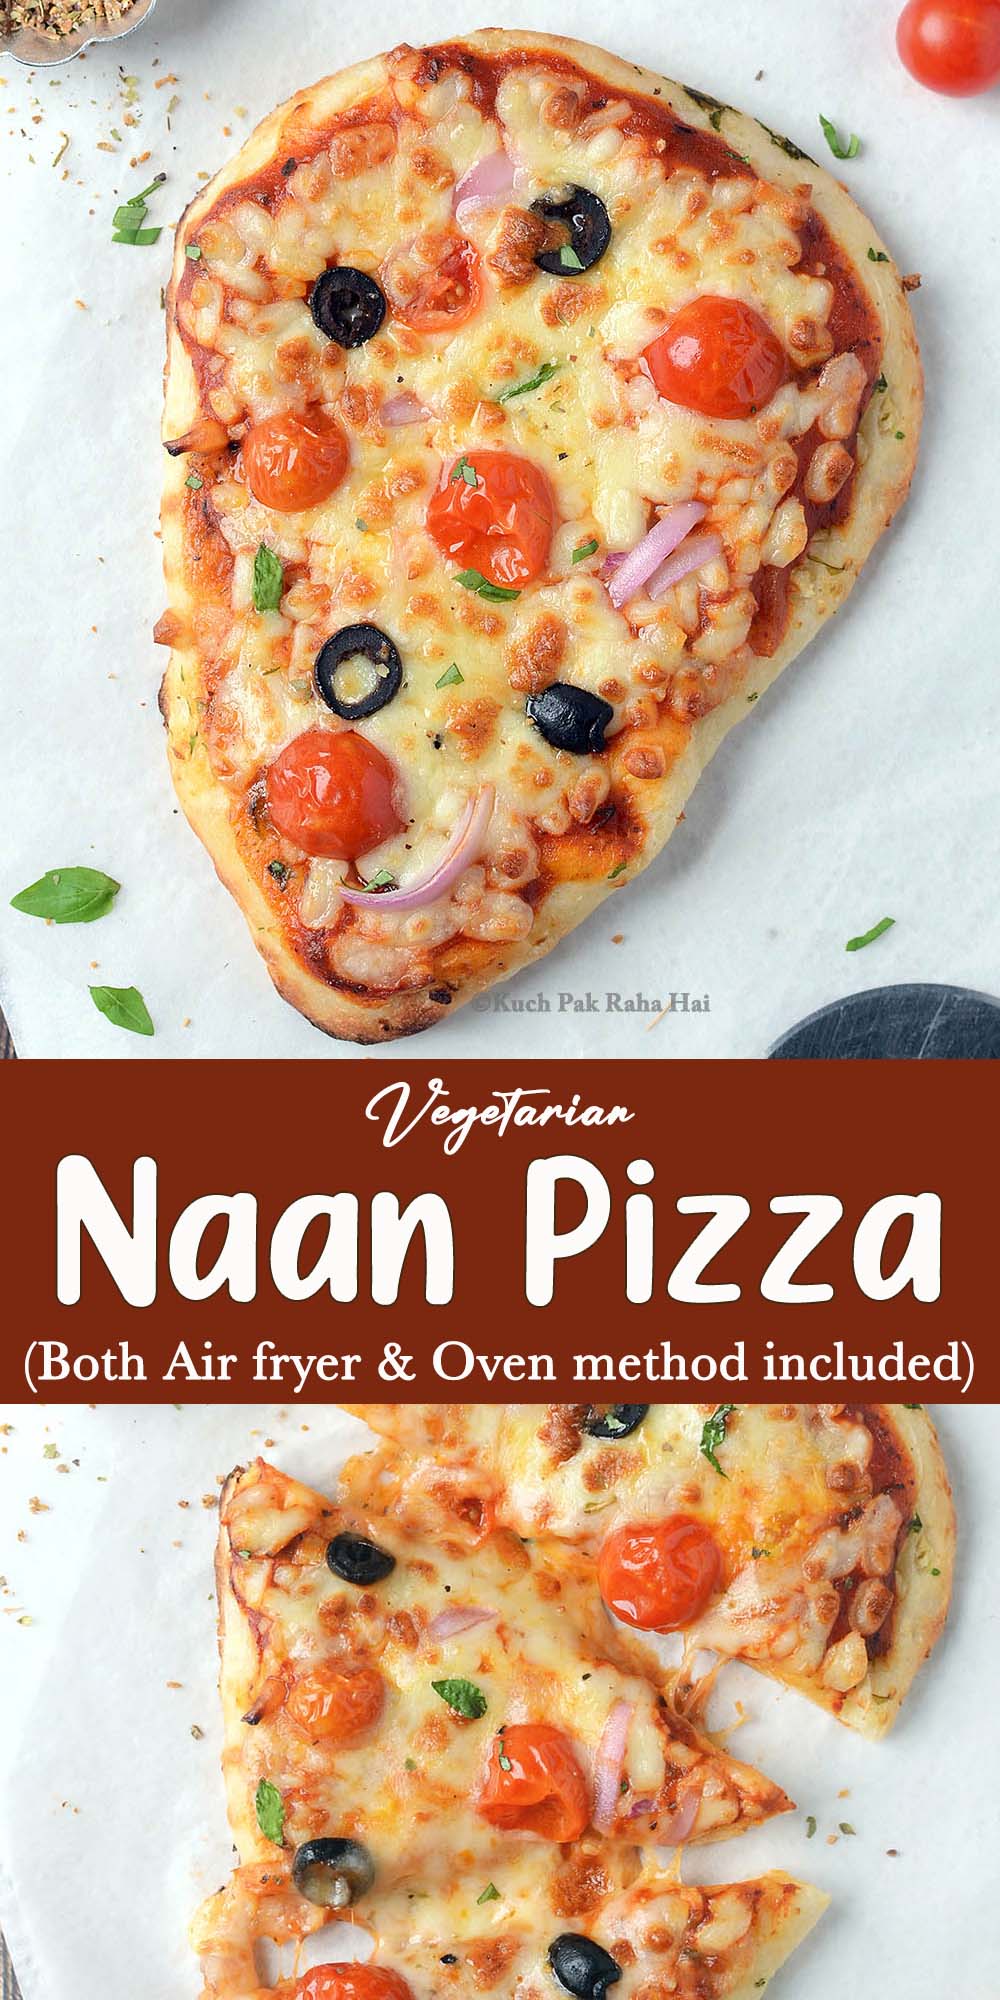 Naan pizza recipe for air fryer.